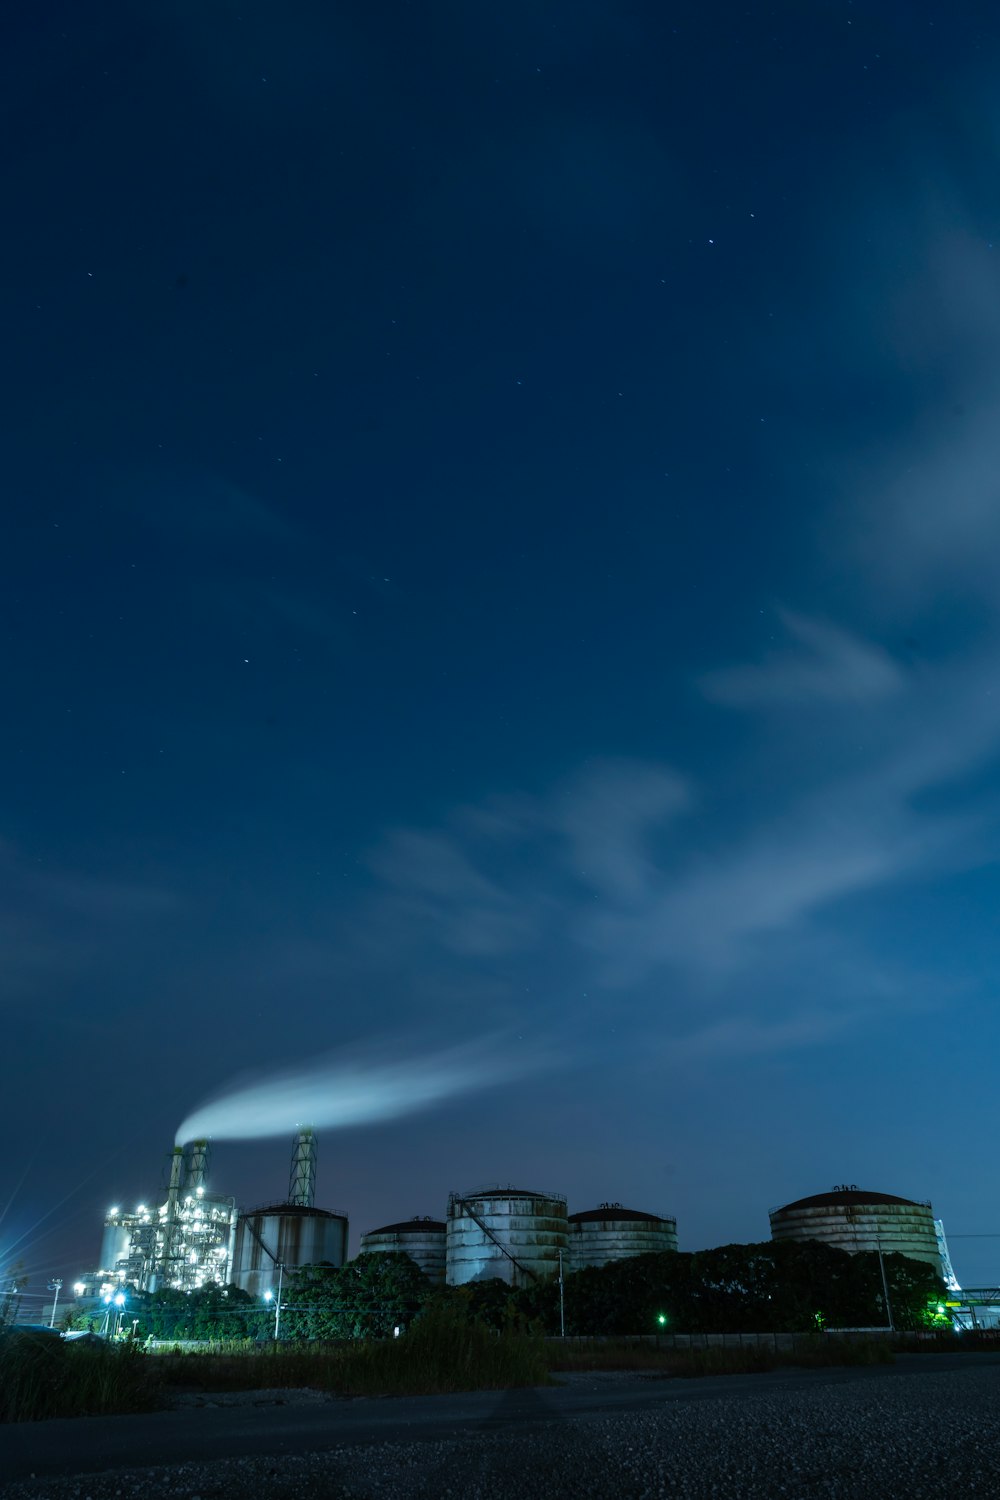 a night time view of a factory with smoke stacks in the background